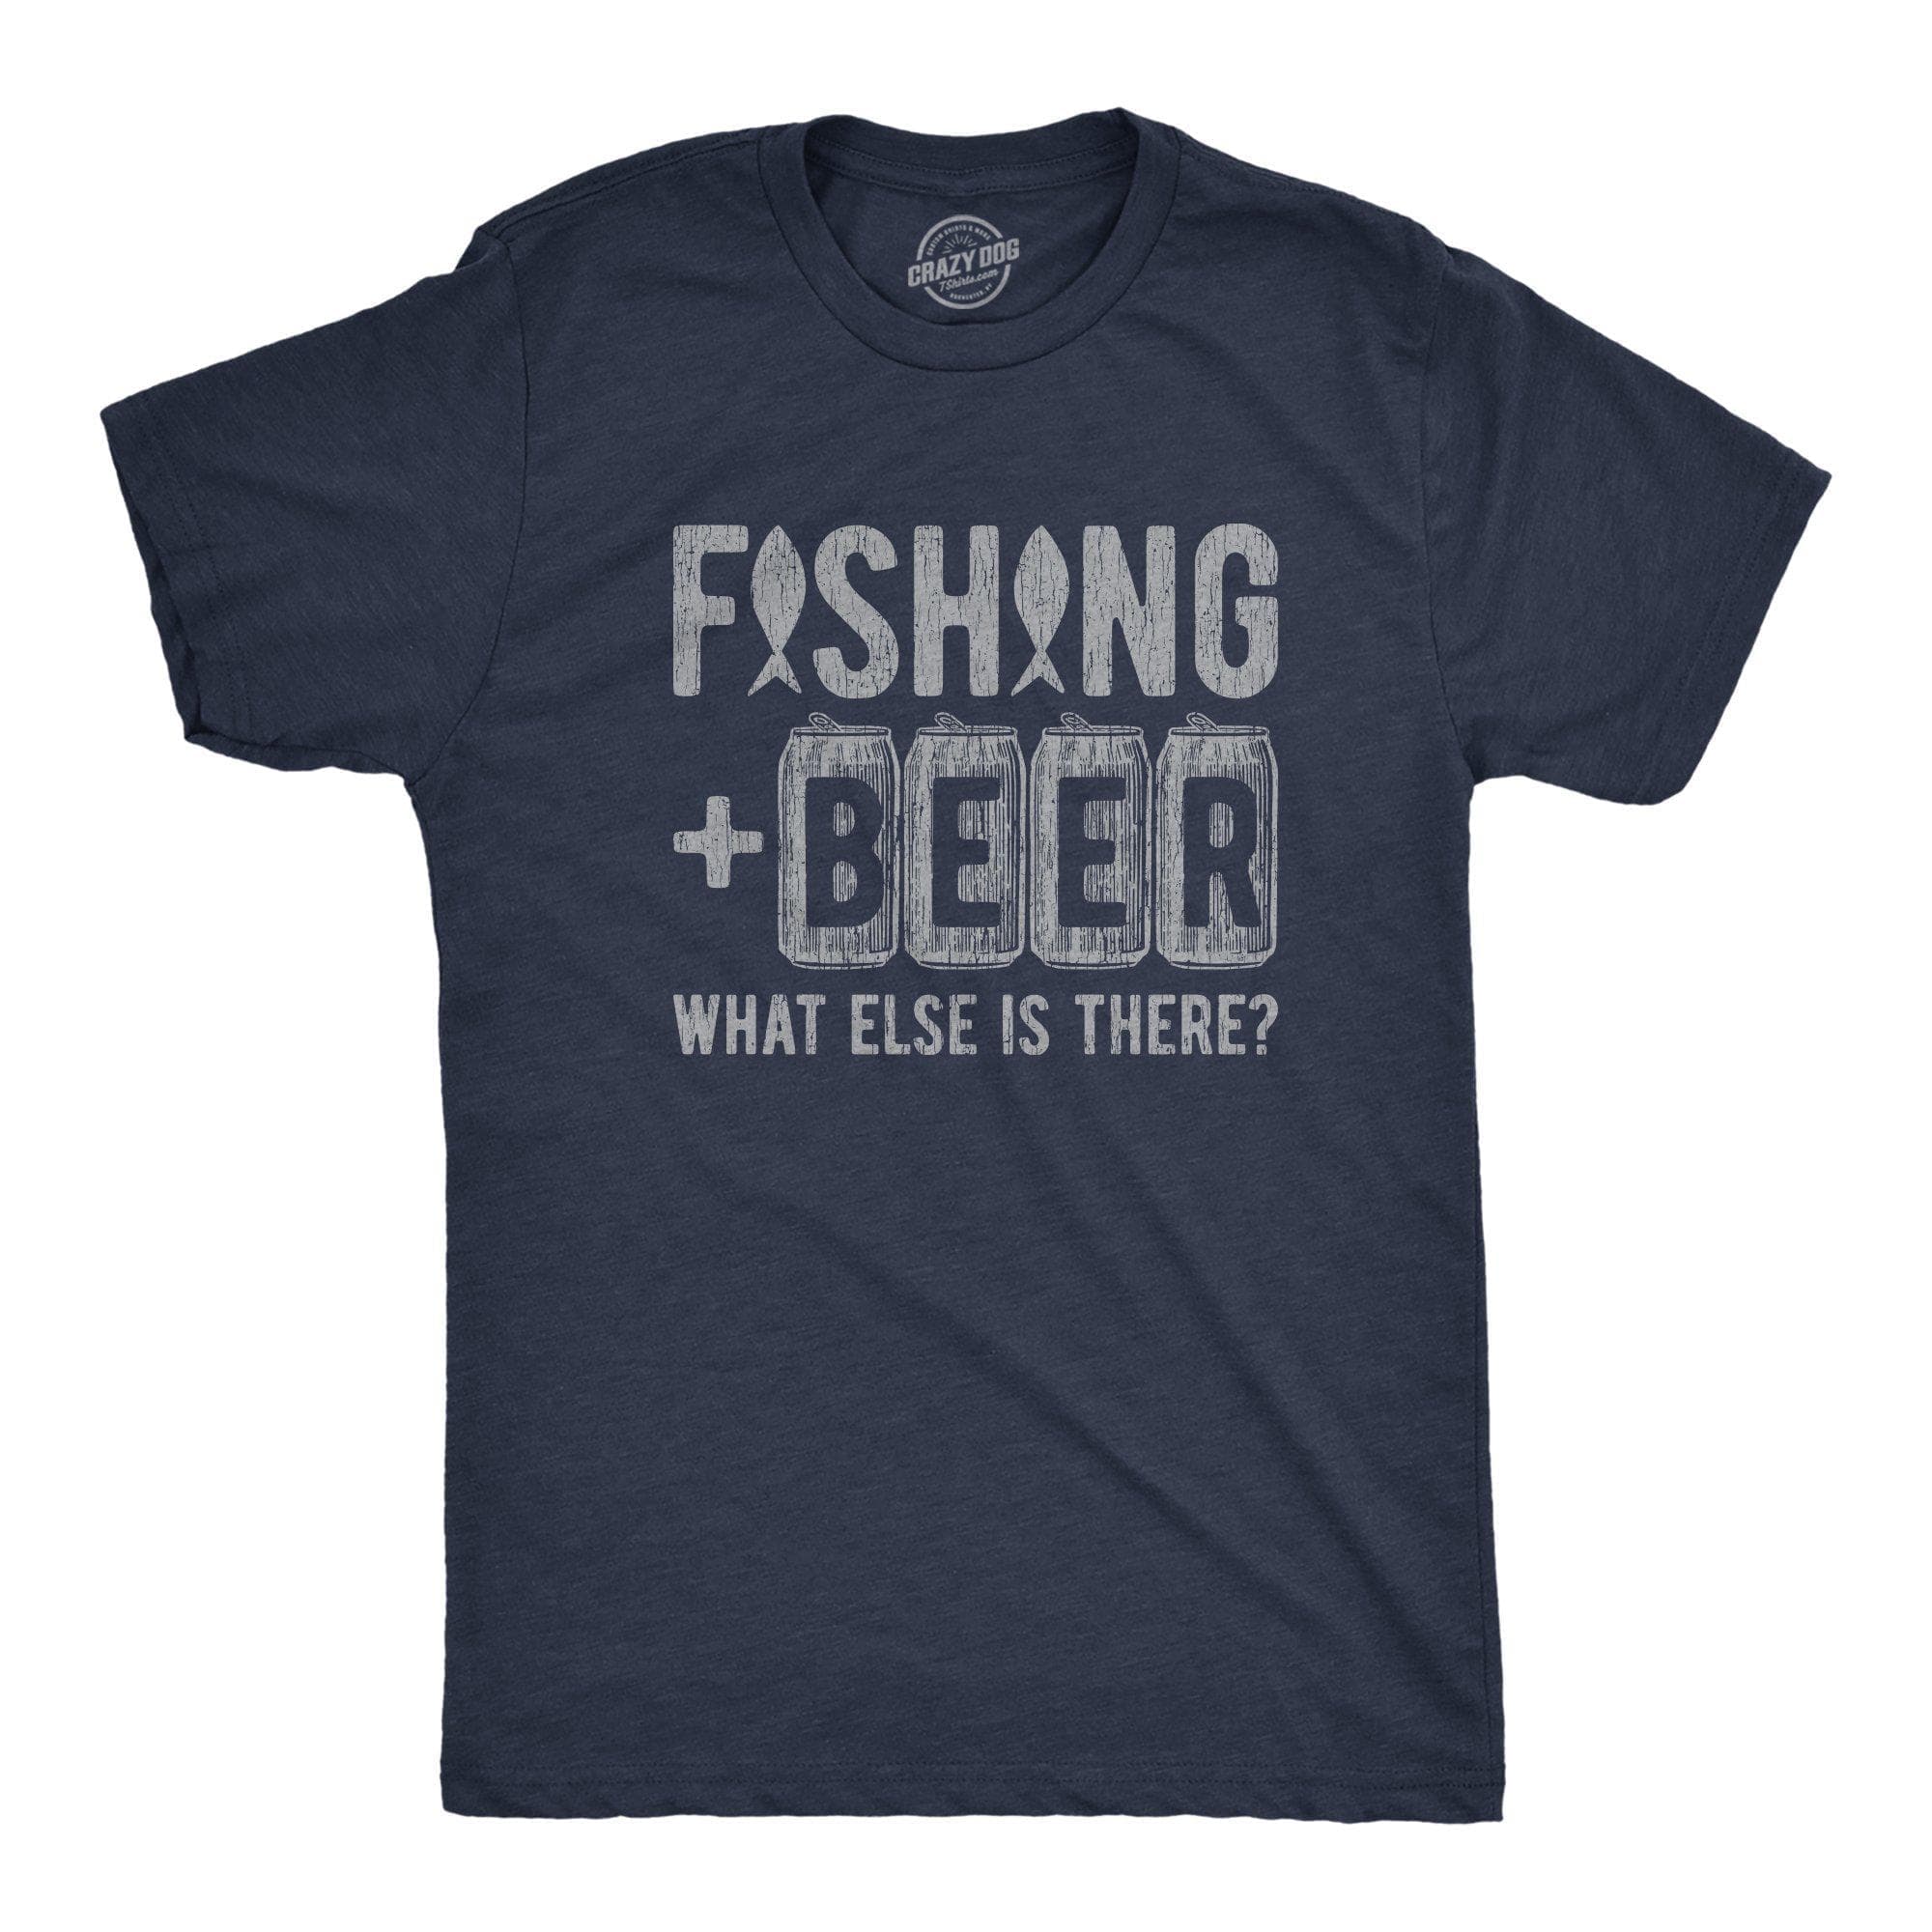 https://cdn.shopify.com/s/files/1/2959/1448/products/crazy-dog-t-shirts-mens-t-shirts-fishing-and-beer-what-else-is-there-men-s-tshirt-28215068229747_2000x.jpg?v=1631821382